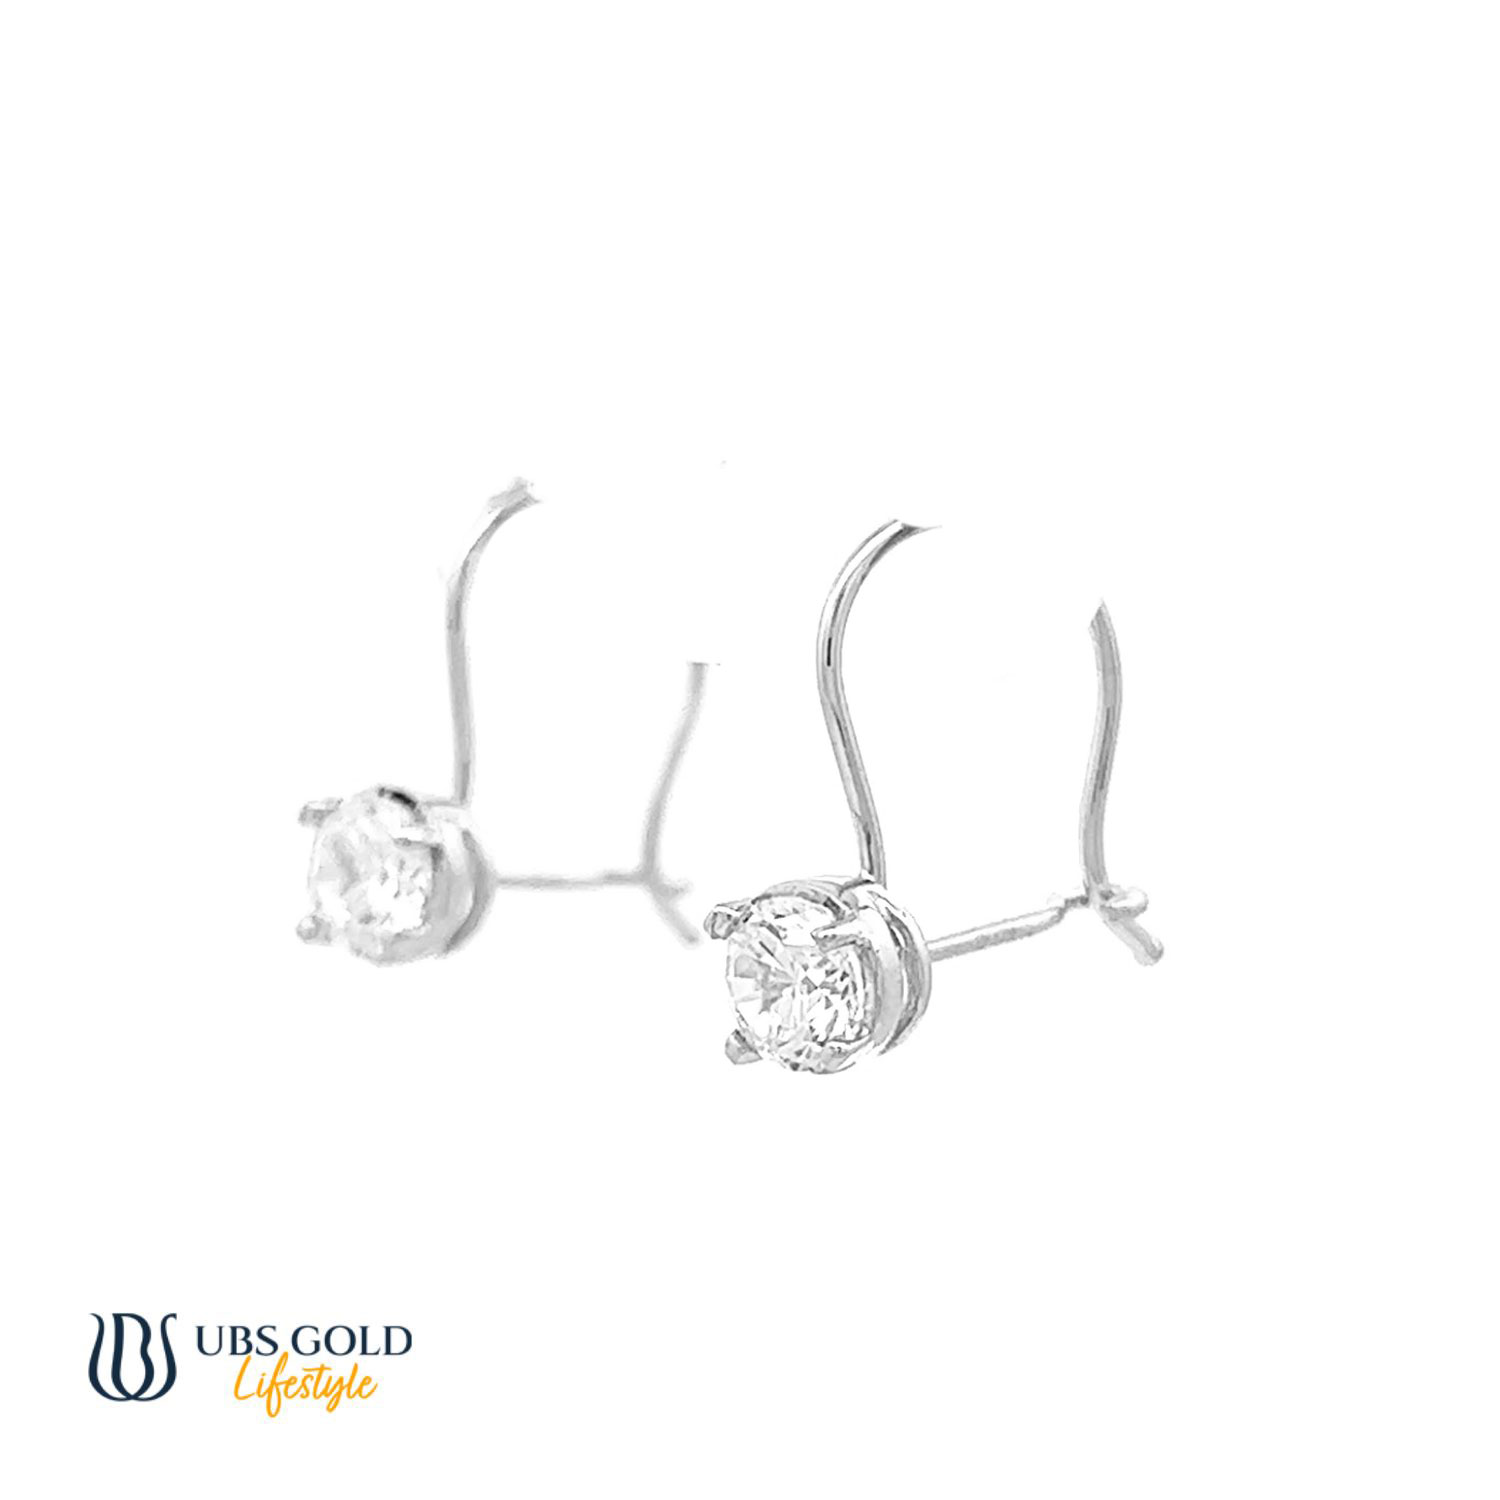 UBS Gold Anting Emas Solitaire - Cab0011 - 17K